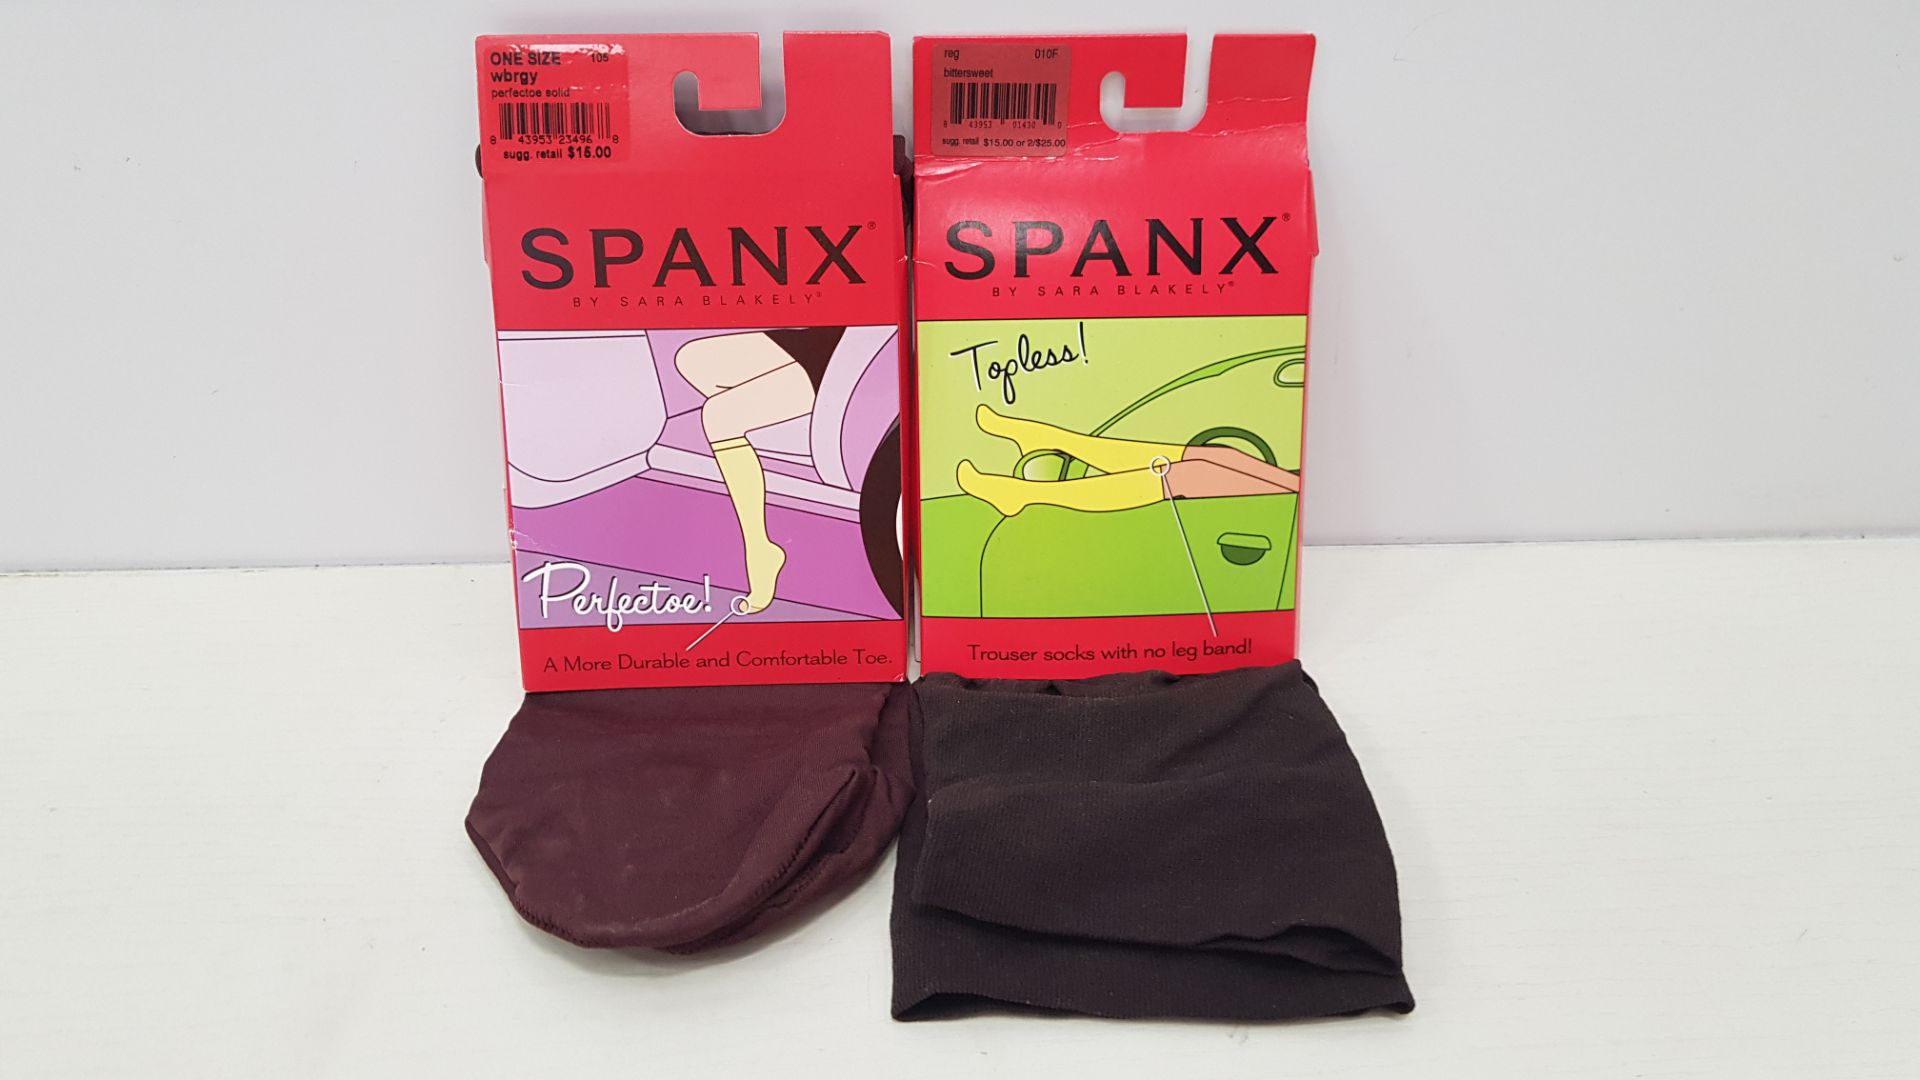 30 PIECE MIXED SPANX LOT CONTAINING TROUSER SOCKS WITH NO LEG BAND, PERFECTOE SOLID IN ONE SIZE